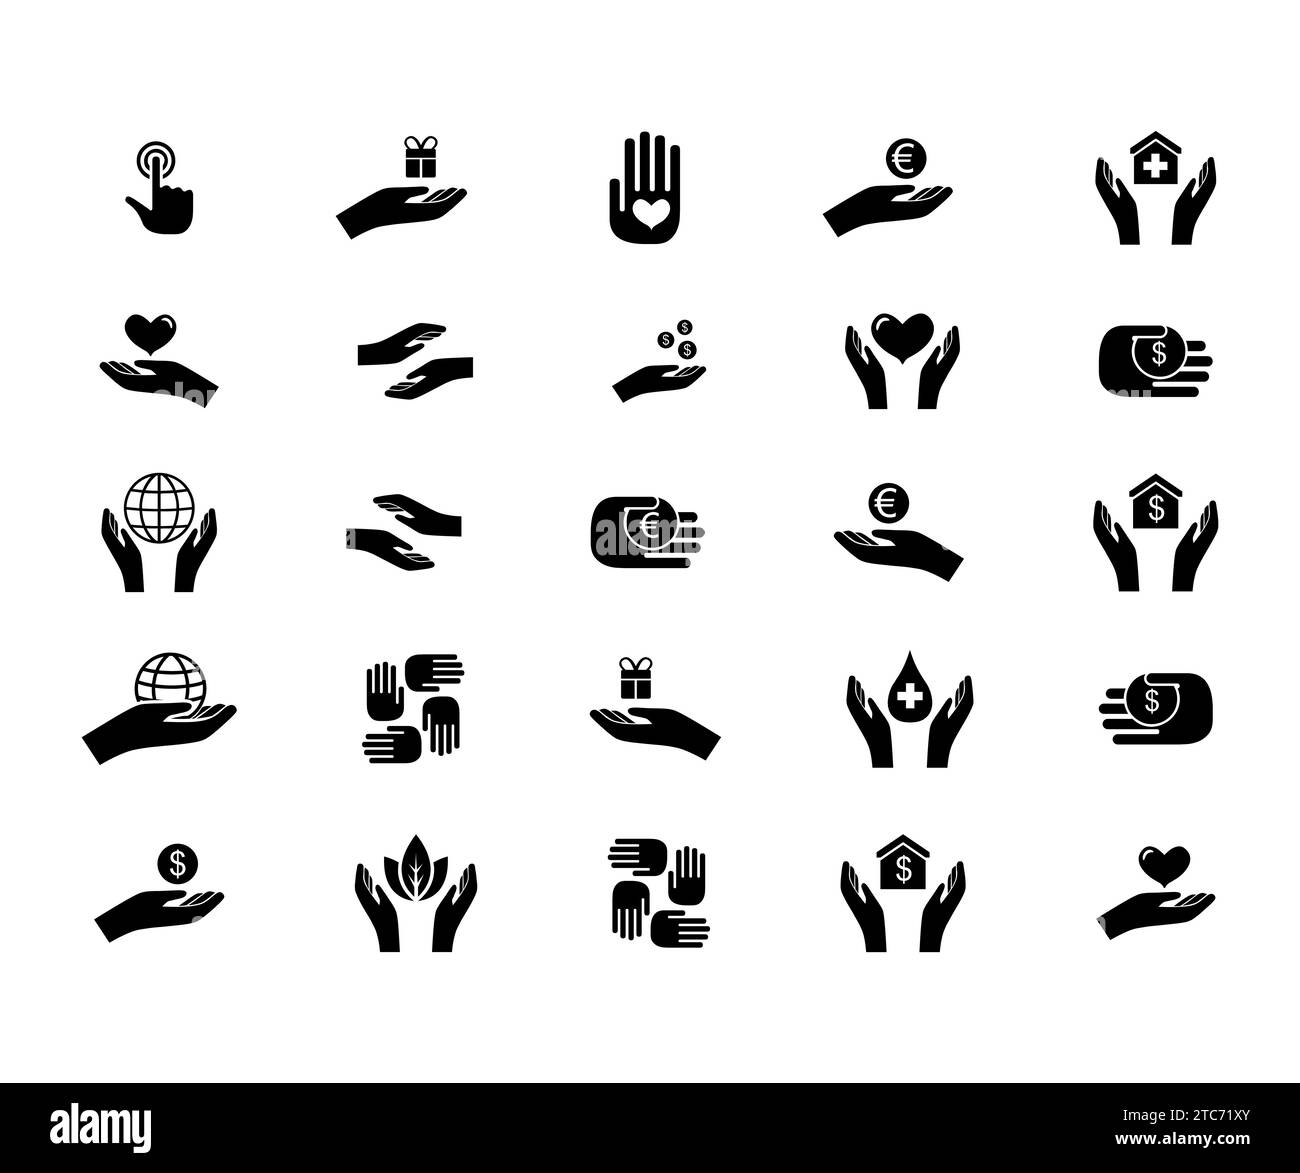 Hand icons set, hand silhouettes vector illustration. Stock Vector